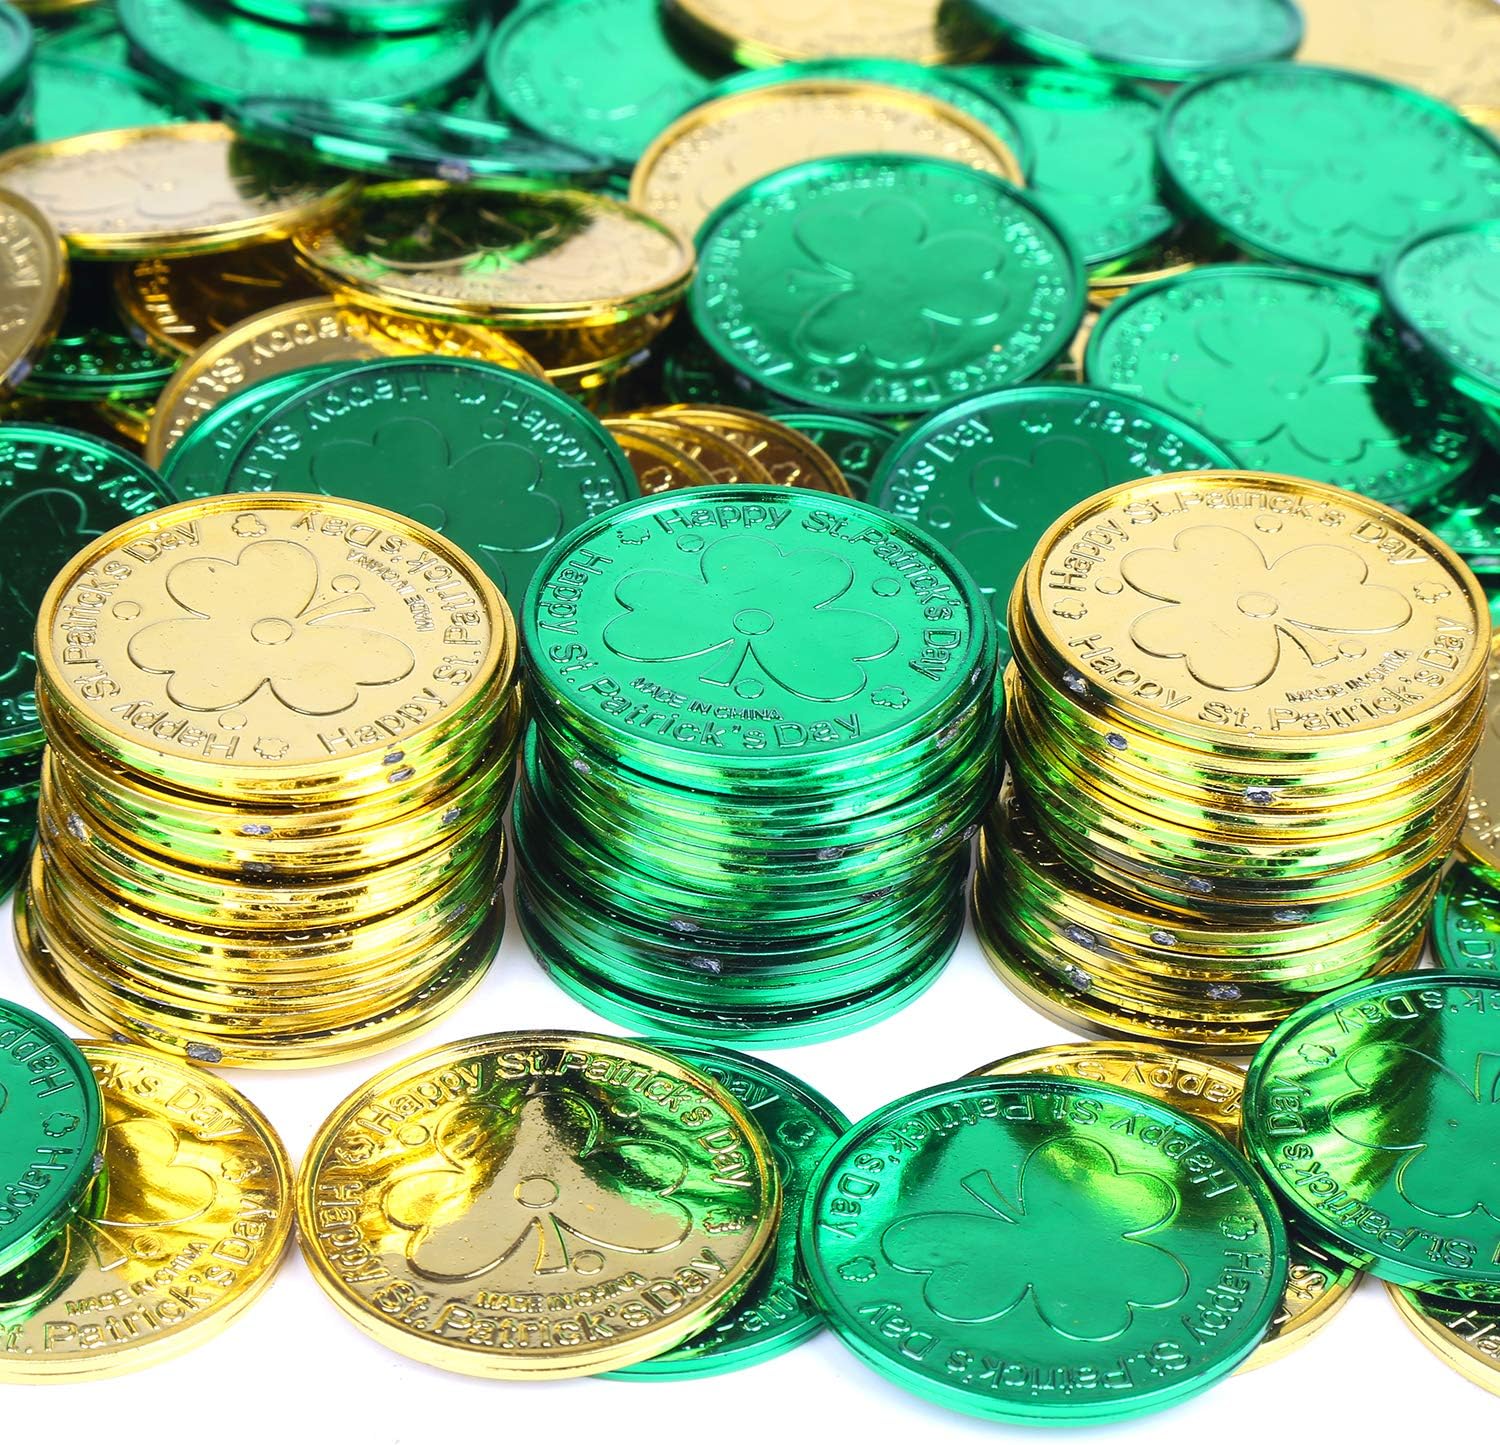 St. Patrick's Party Decoration 144PCS Lucky Coins Plastic Shamrock Leprechaun 3-Leaf Clover Coins (Gold and Green)